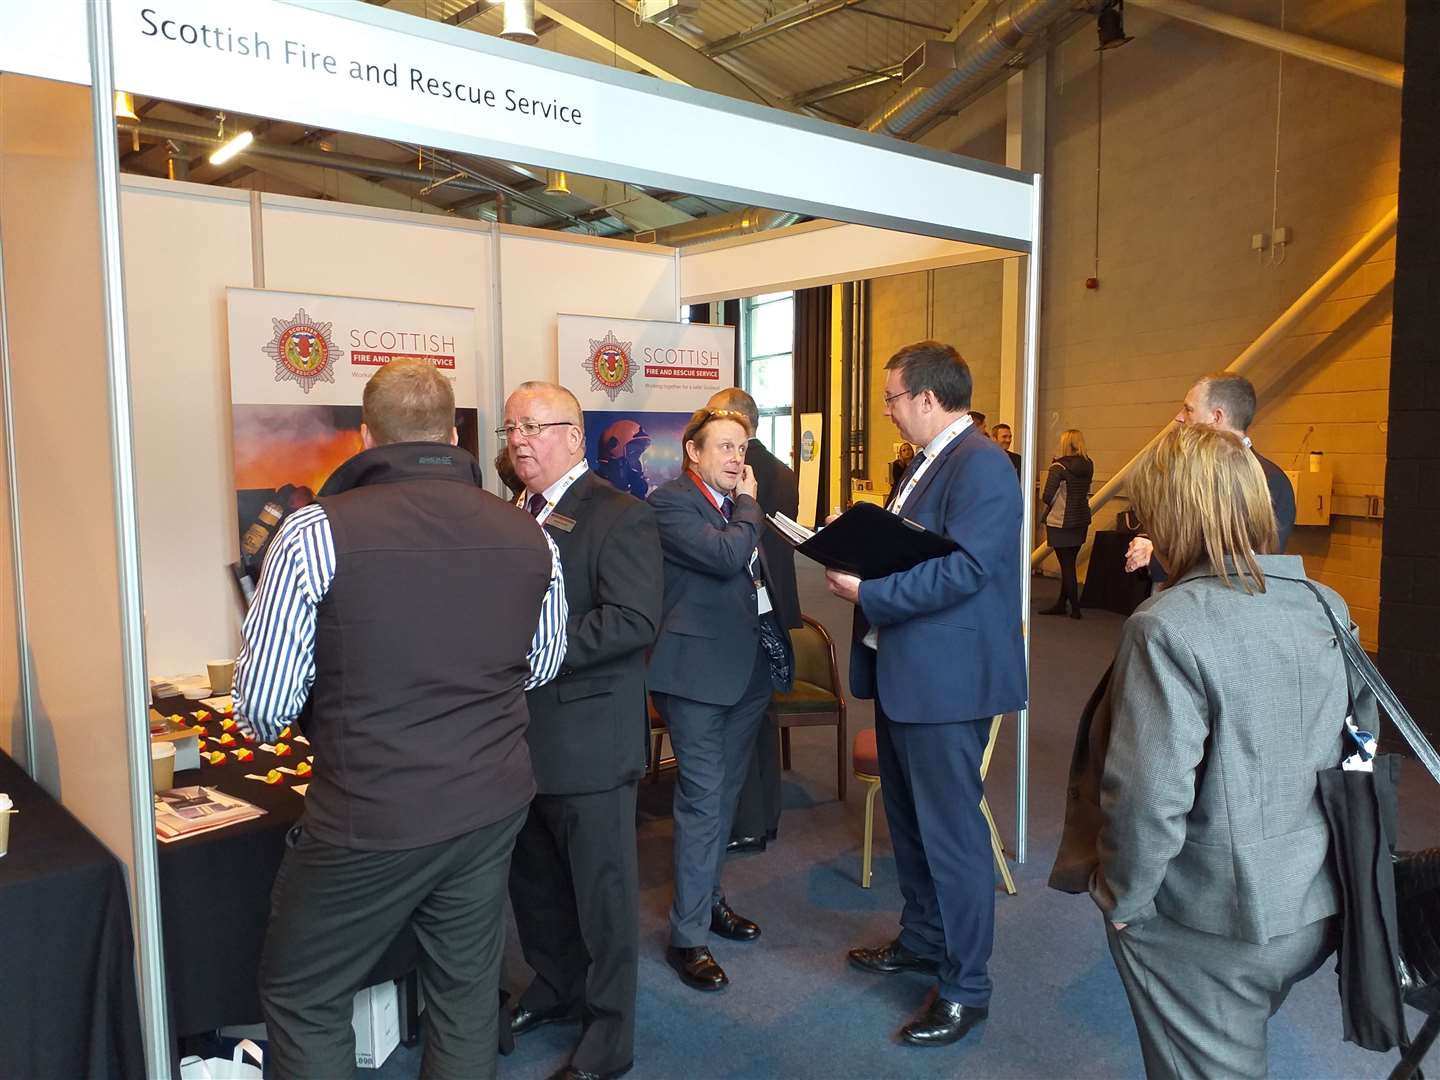 Although online this year, the Meet the Buyer North event will be a great opportunity to find new suppliers – particularly in the more rural parts of the Scotland.